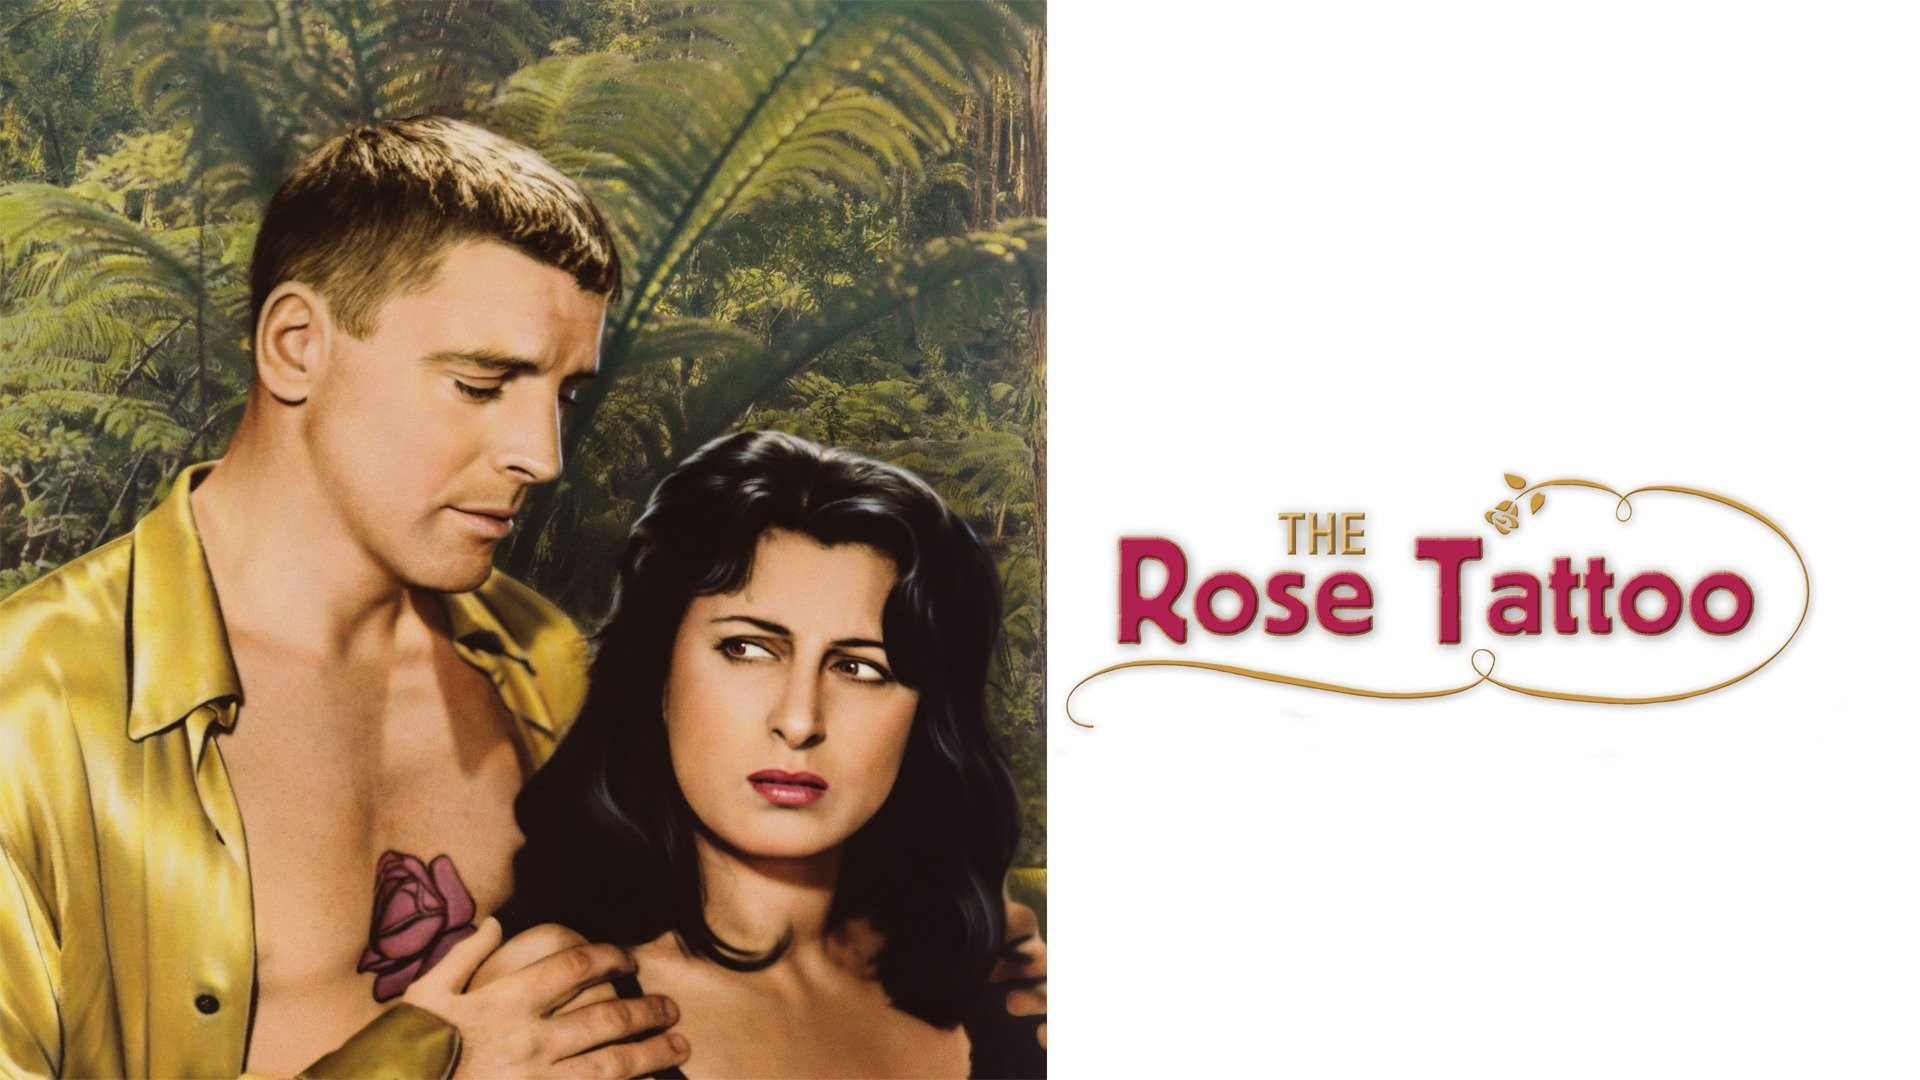 The Rose Tattoo comes to the stage at 2nd Story Theatre